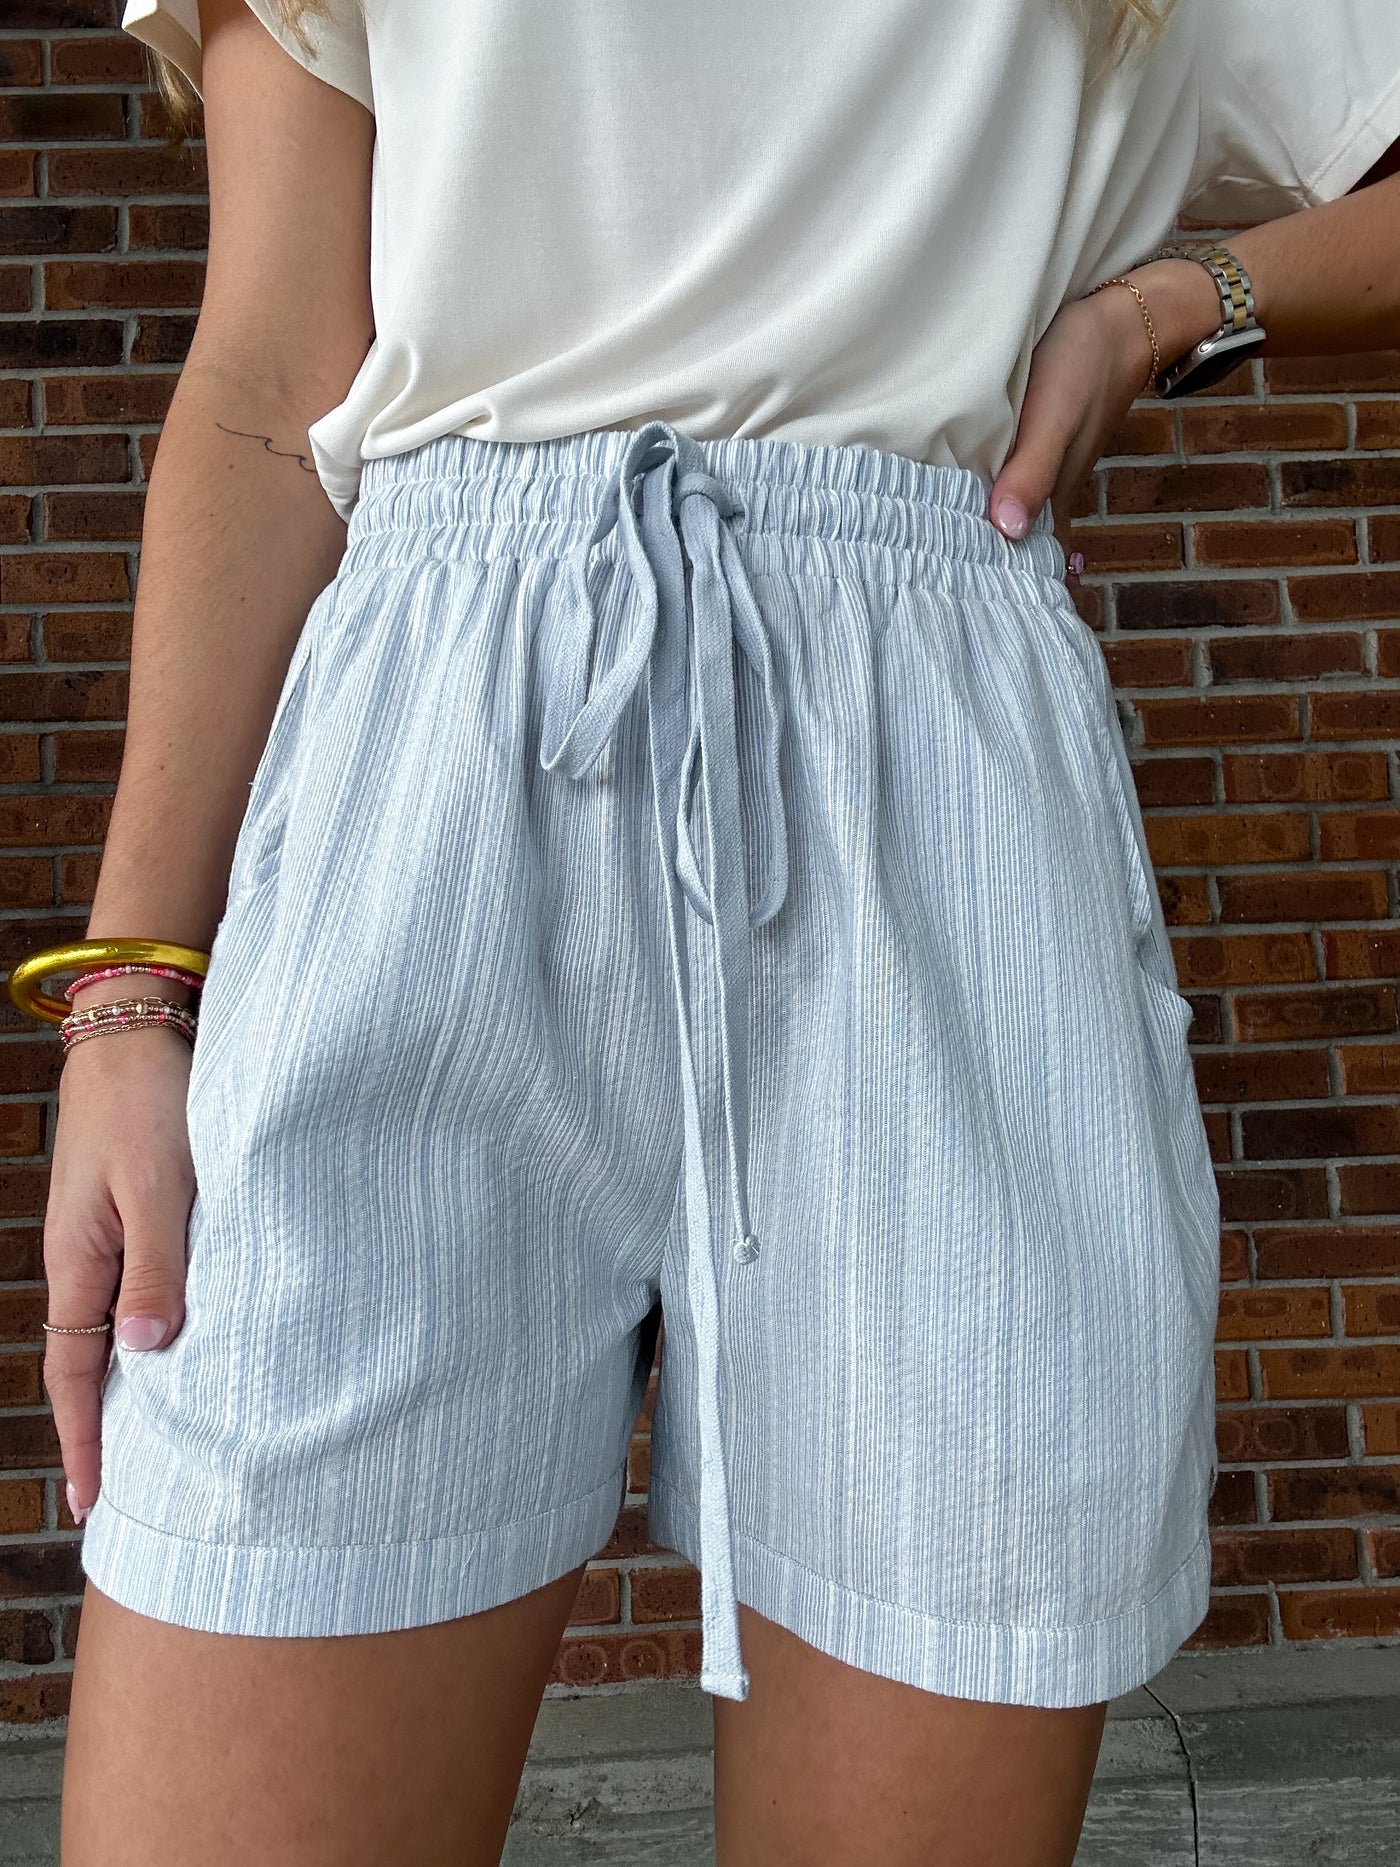 The Soft Striped Everyday Shorts